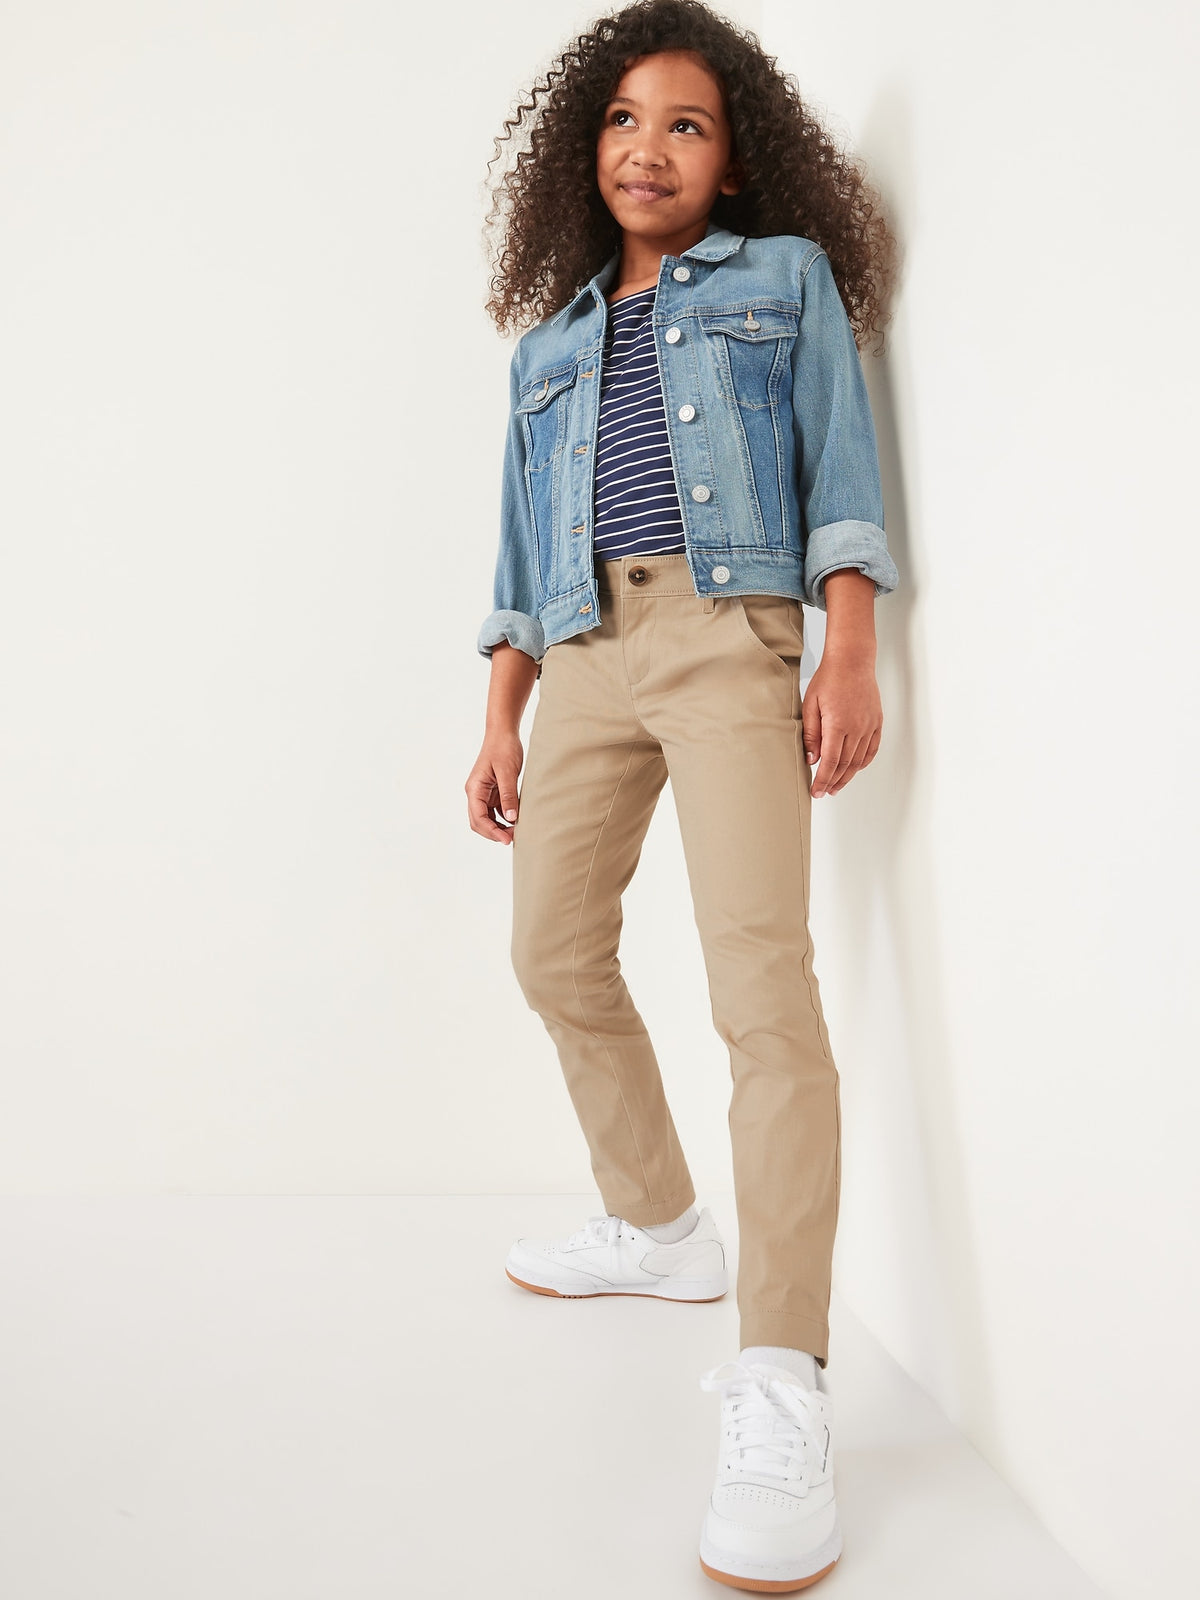 Uniform Ponte-Knit Jeggings for Girls - Old Navy Philippines